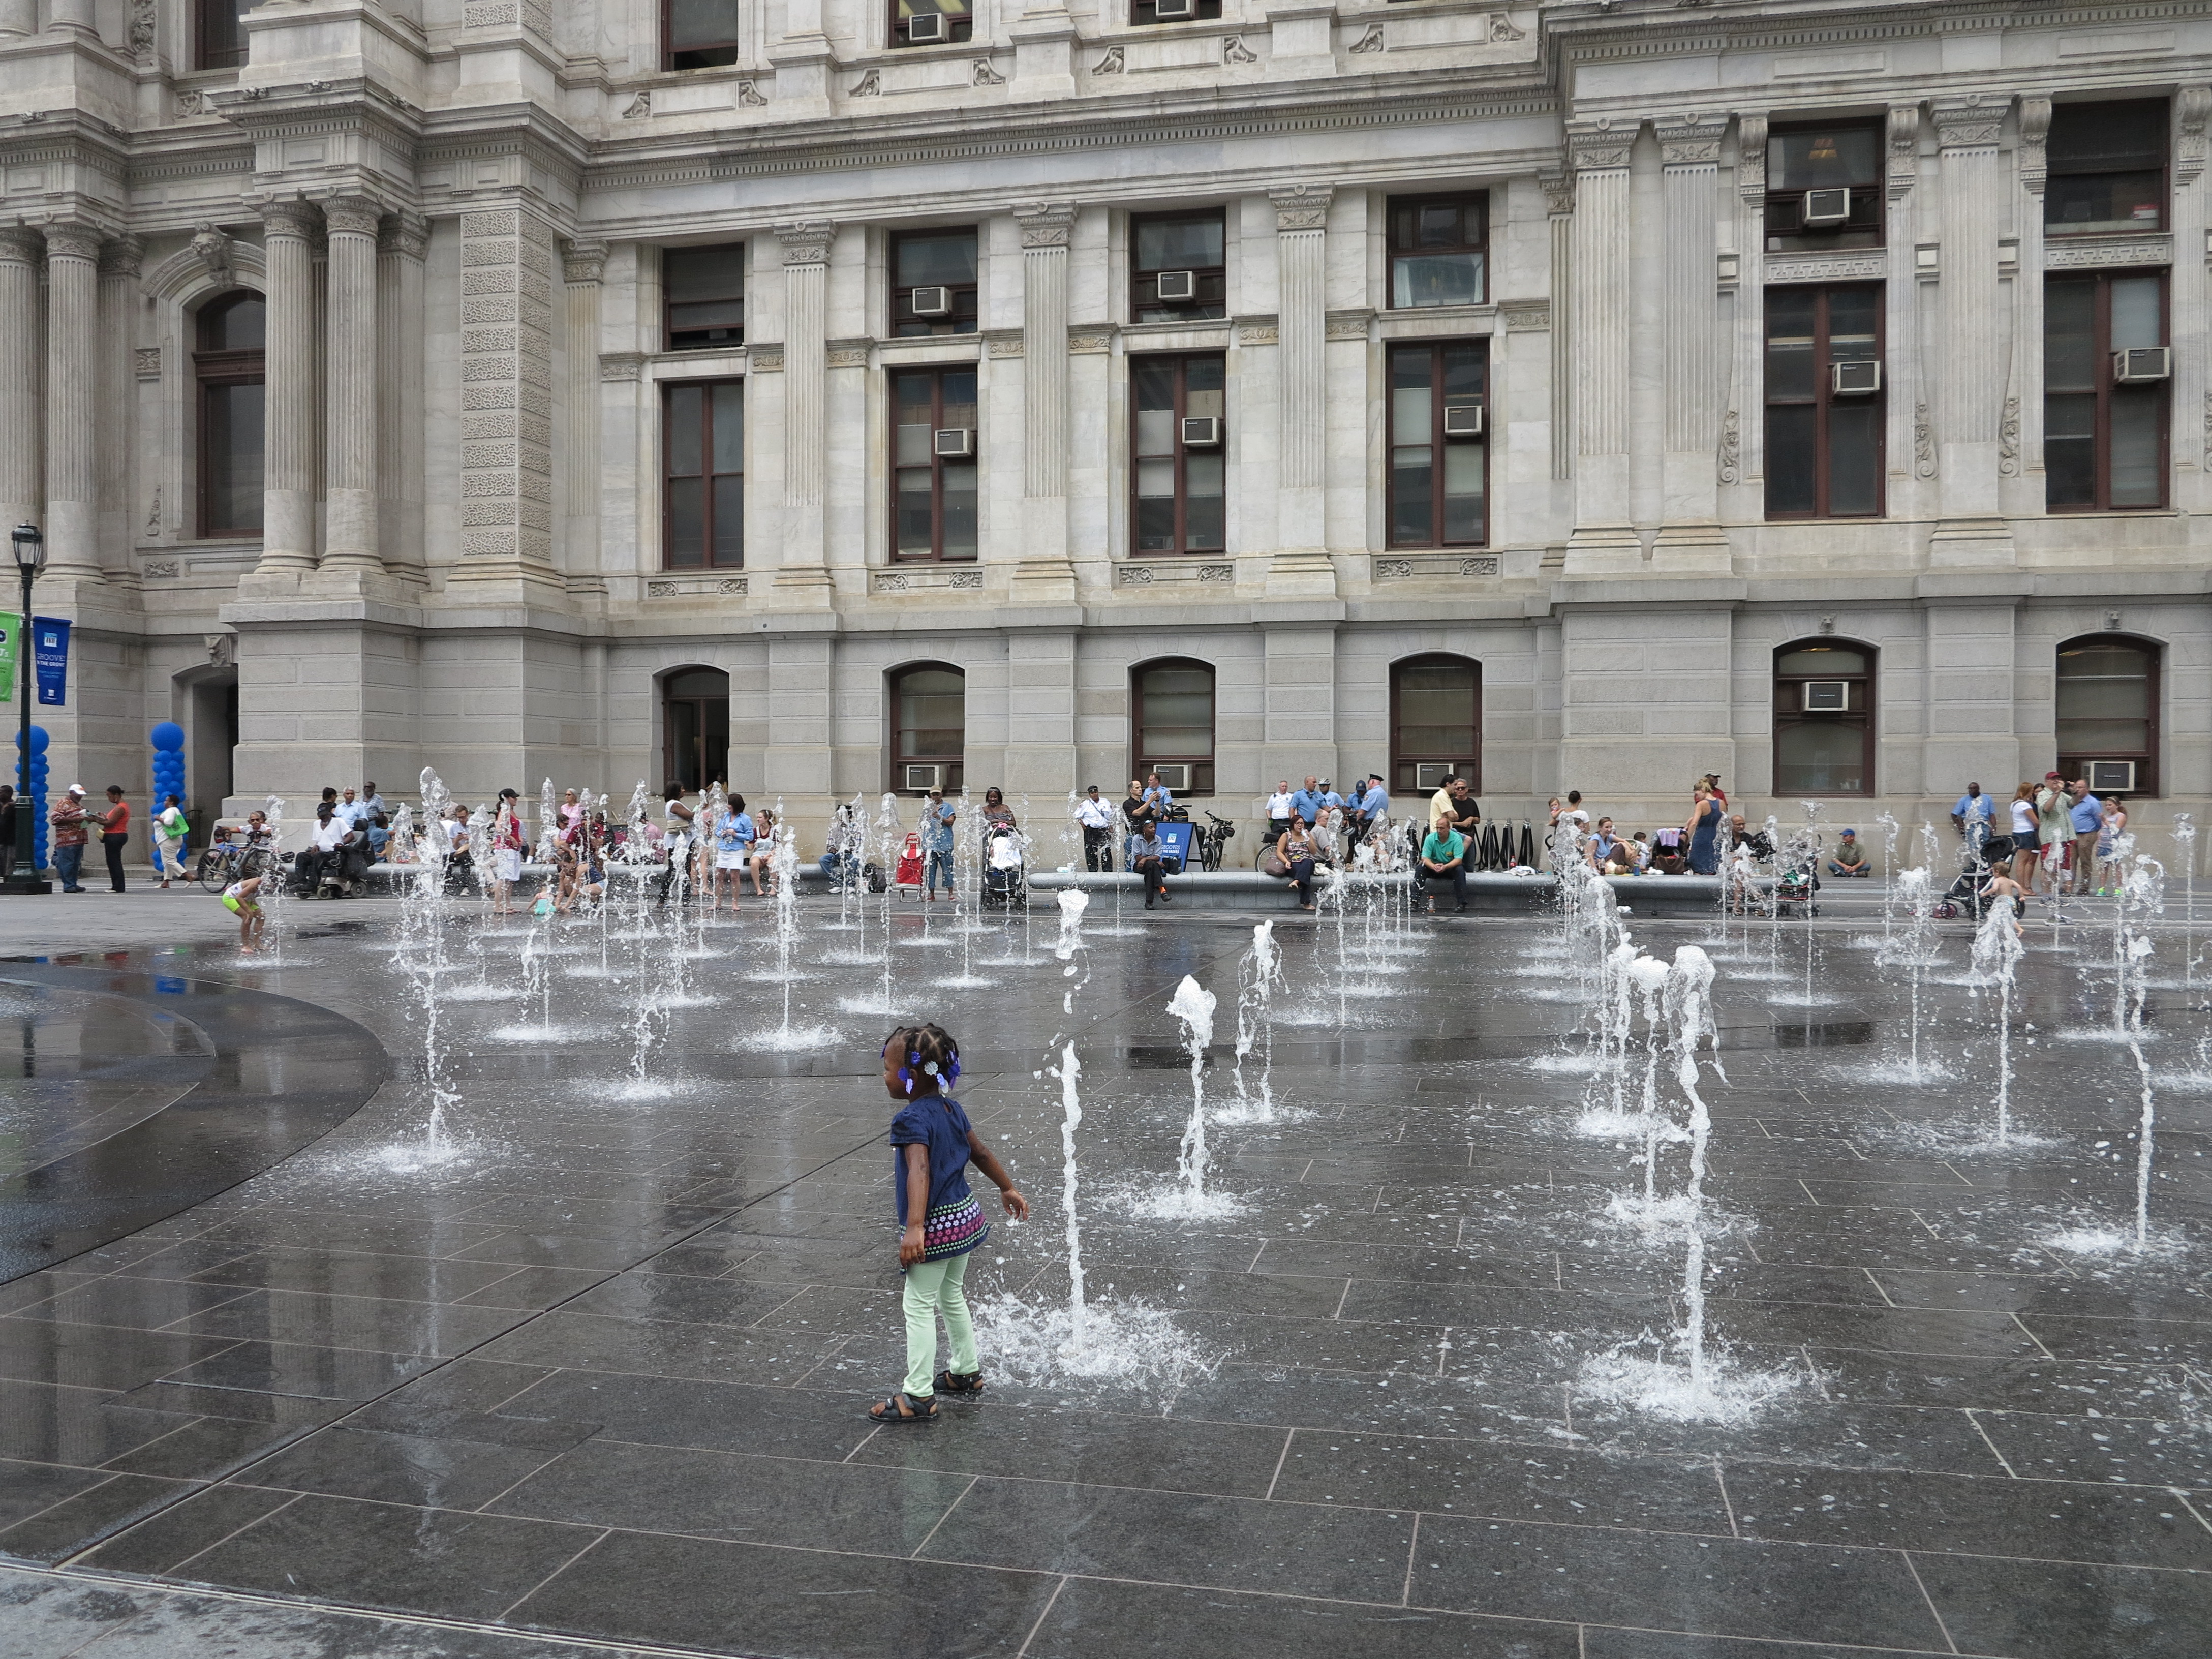 Kids splash in fountains while grown-ups watch from benches